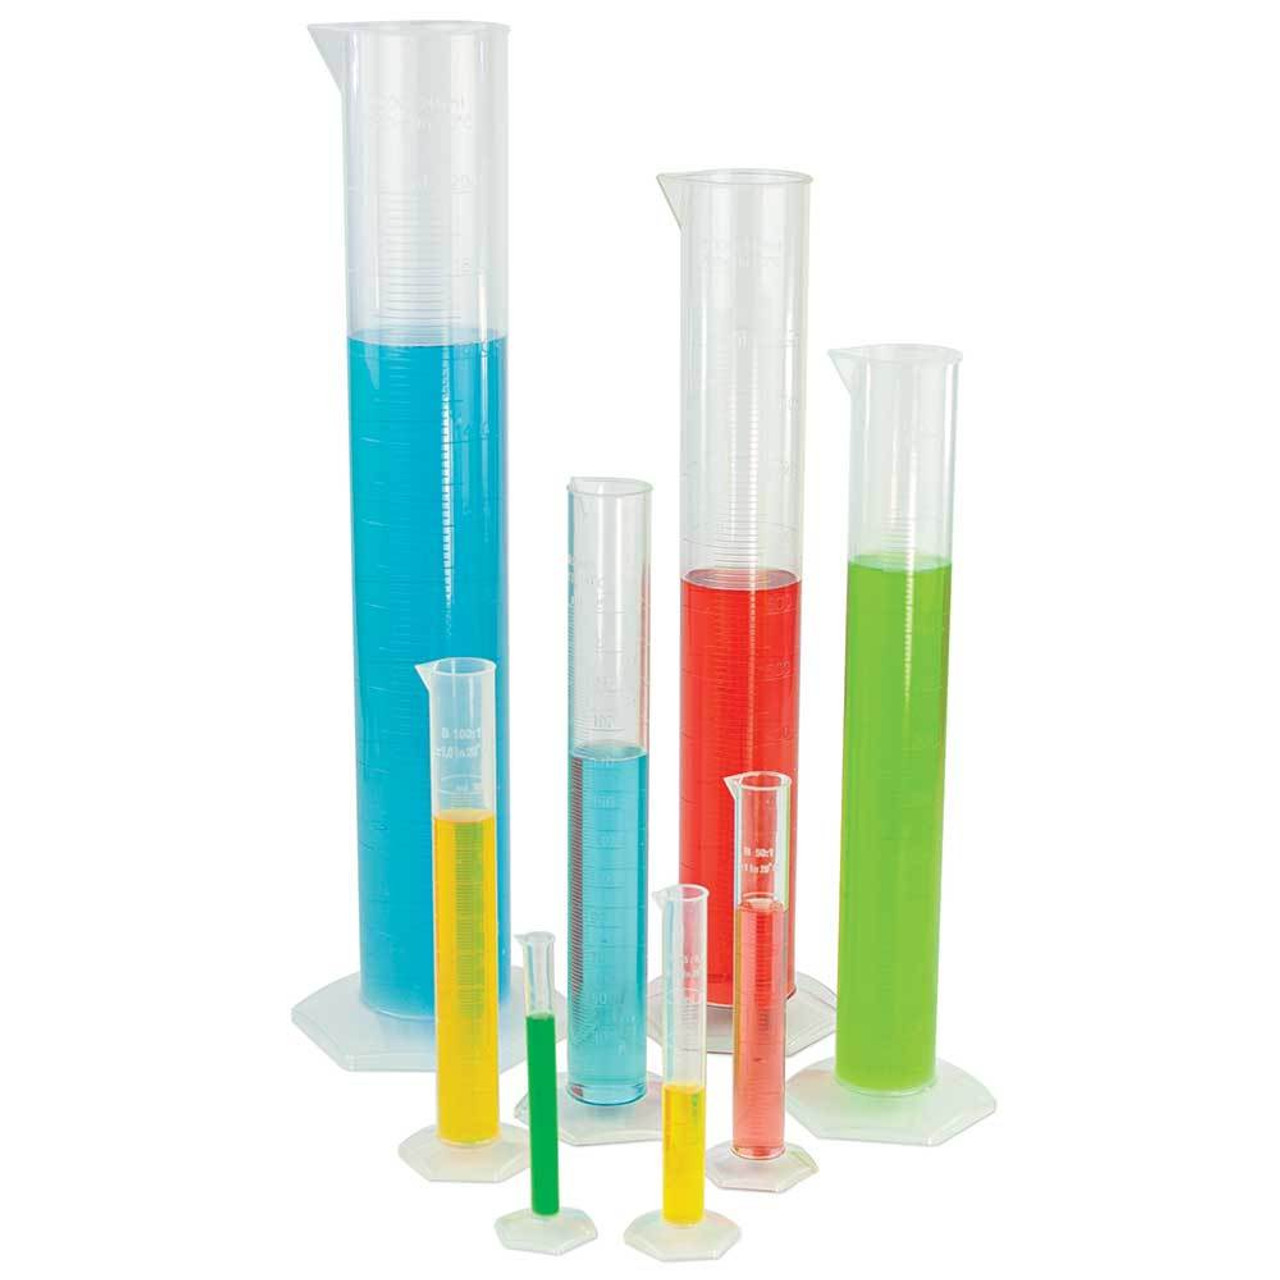 A Plastic Class A Graduated Cylinder Will Make Your Lab Safer Without Sacrificing Accurate Laboratory Liquid Measuring